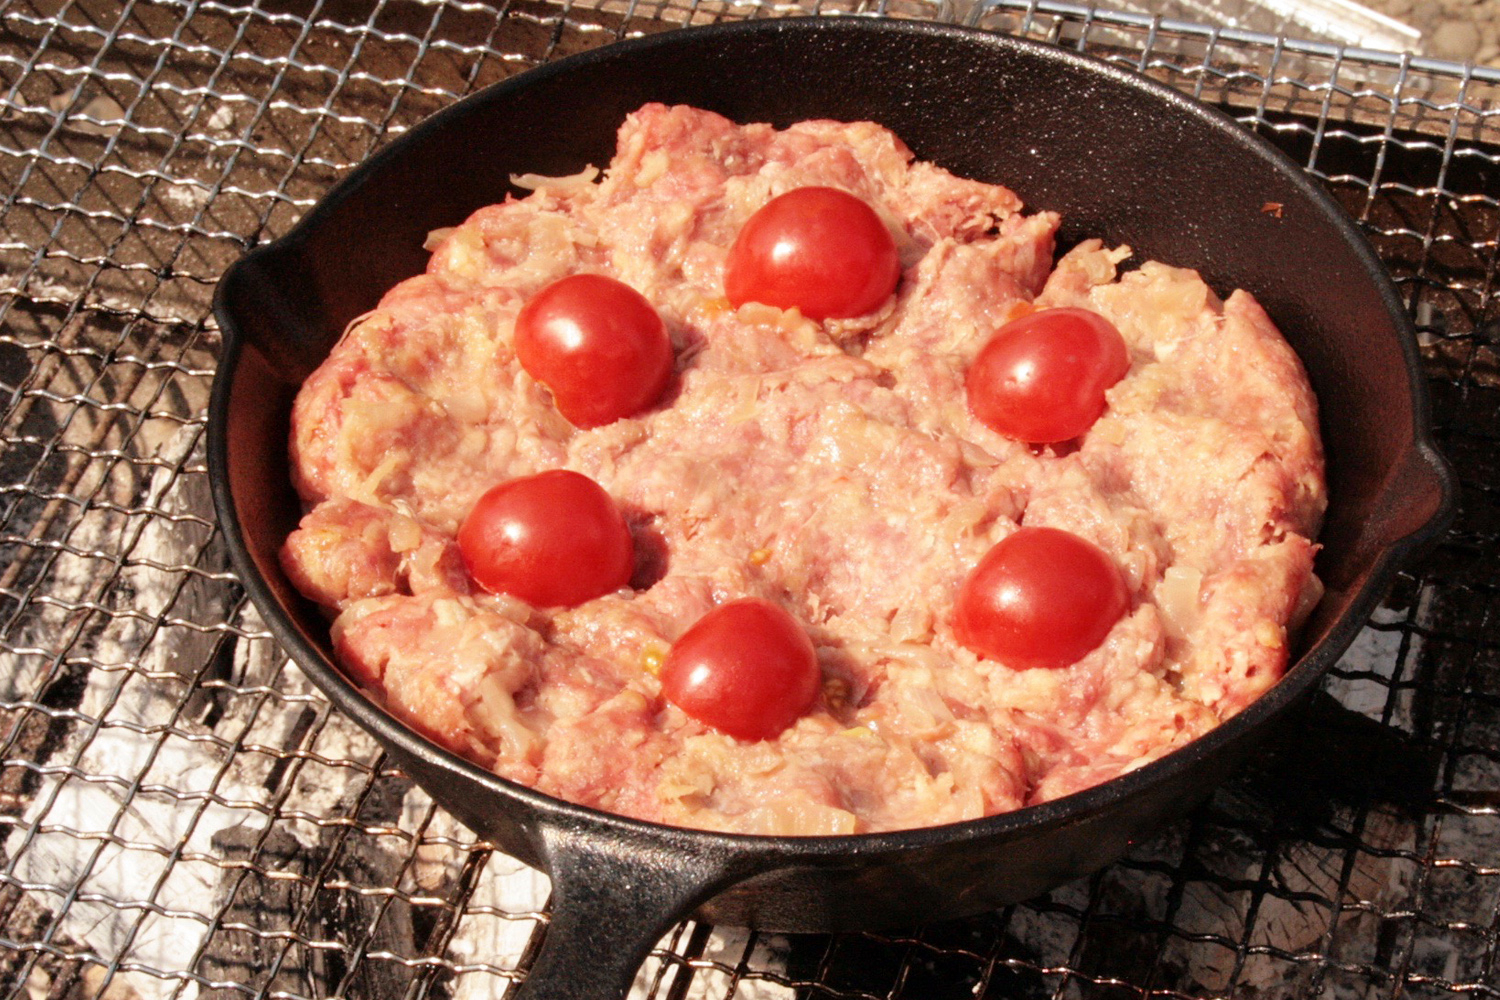 Skillet and cherry tomatoes